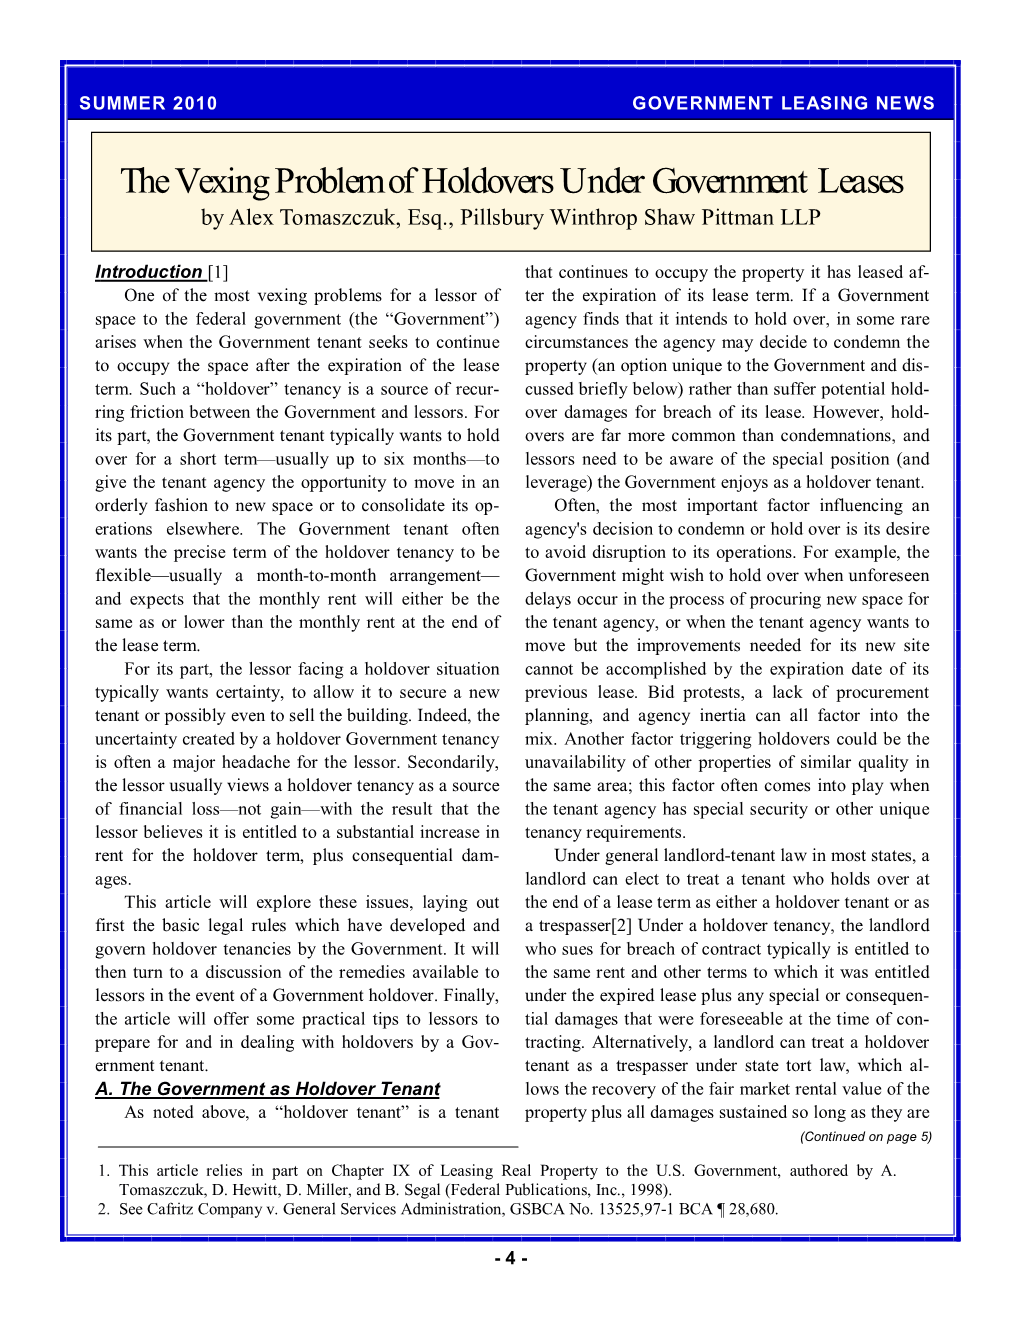 The Vexing Problem of Holdovers Under Government Leases by Alex Tomaszczuk, Esq., Pillsbury Winthrop Shaw Pittman LLP